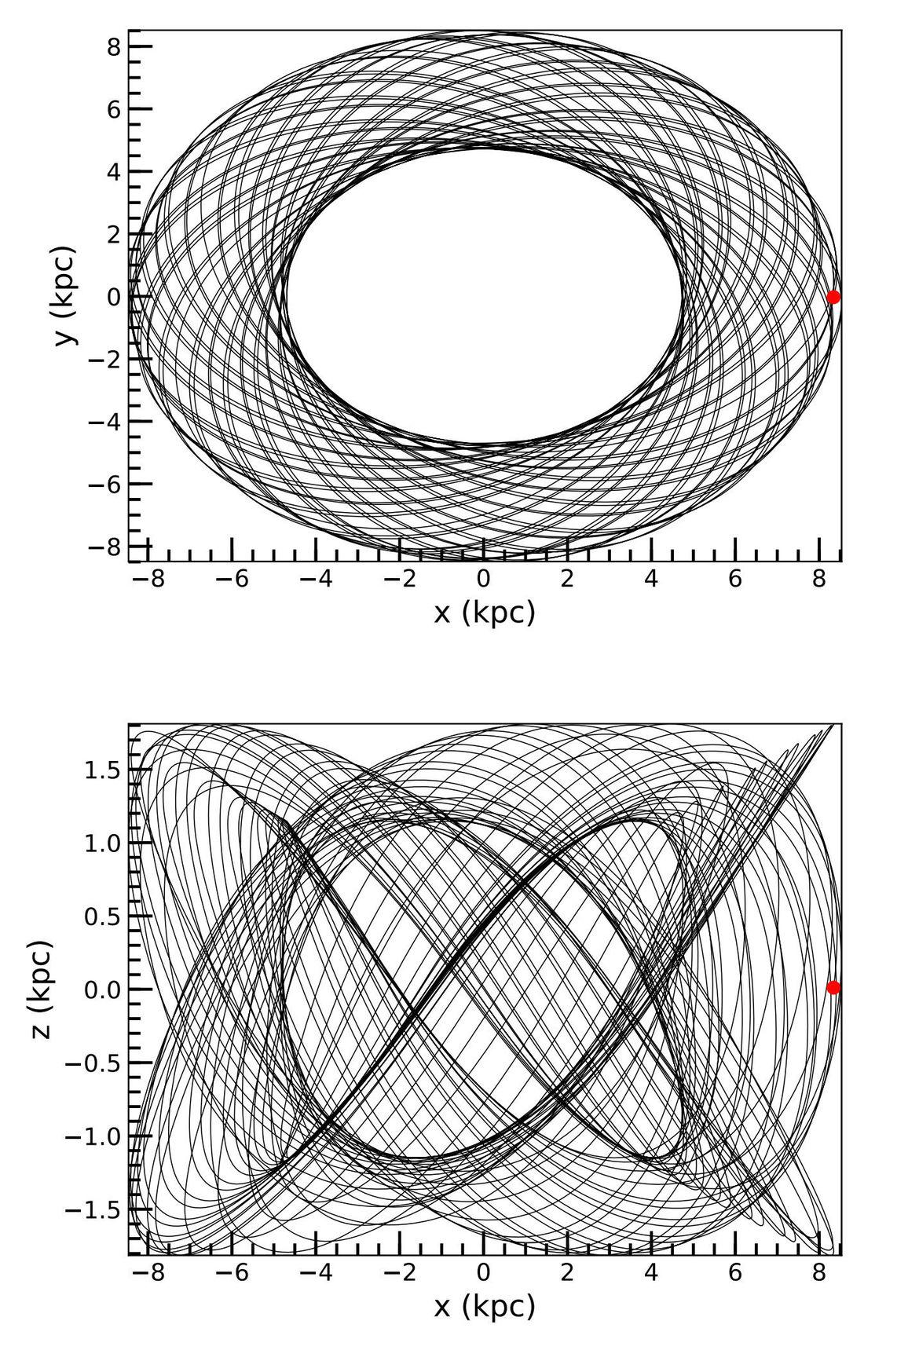 The orbit of LHS 1815 is roughly circular when seen from above (top; note the x and y axis scales distort the plot) but from the side (bottom) it can be seen to be highly tilted, going well above and below the galactic plane (1 kpc = 3,260 light years). 